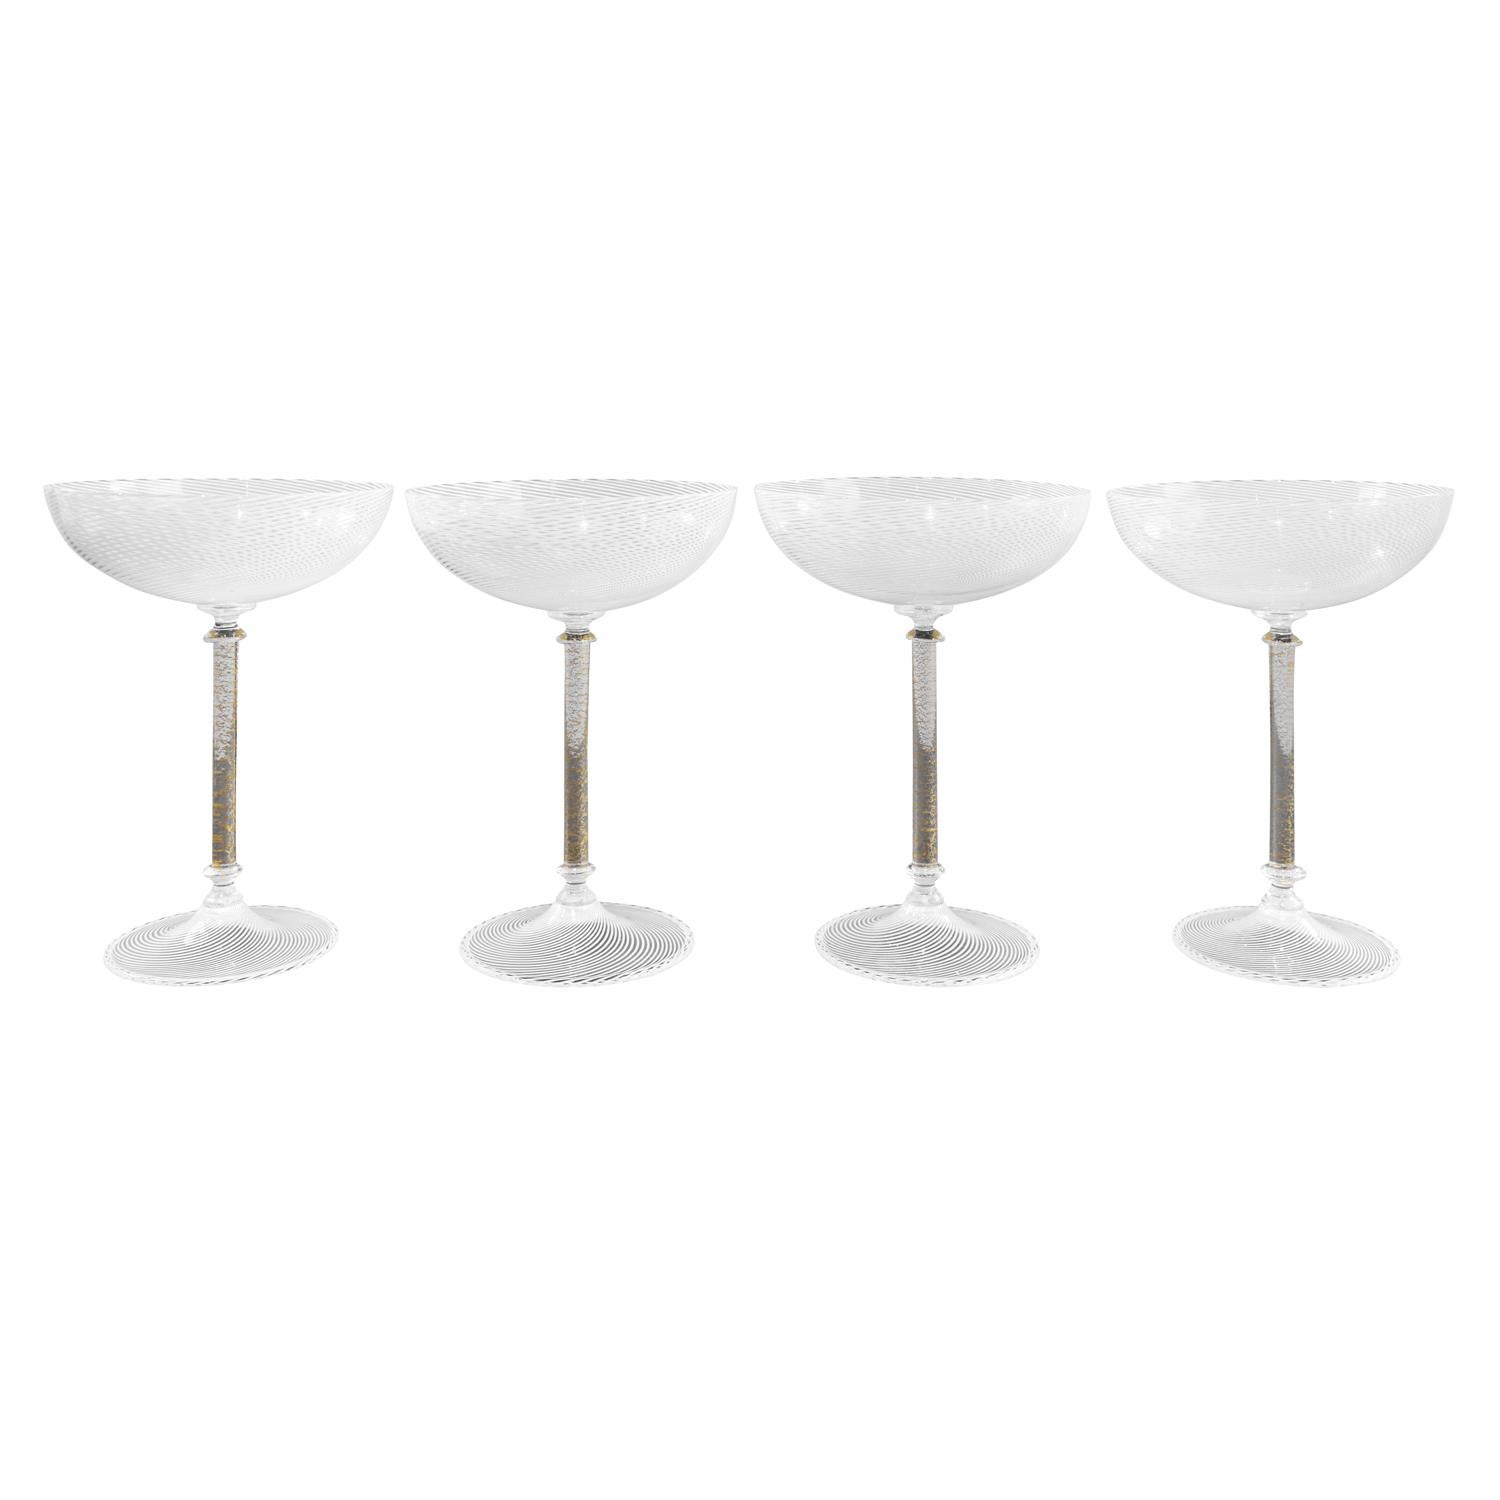 Rare set of 4 hand blown champagne coupe glasses, mezza filigrana on top and bottom with gold foil in the stems, attributed to Tapio Wirkkala for Venini, Murano Italy, 1960s. These are extraordinary.

Reference:
Venini Catalogue Raisonne